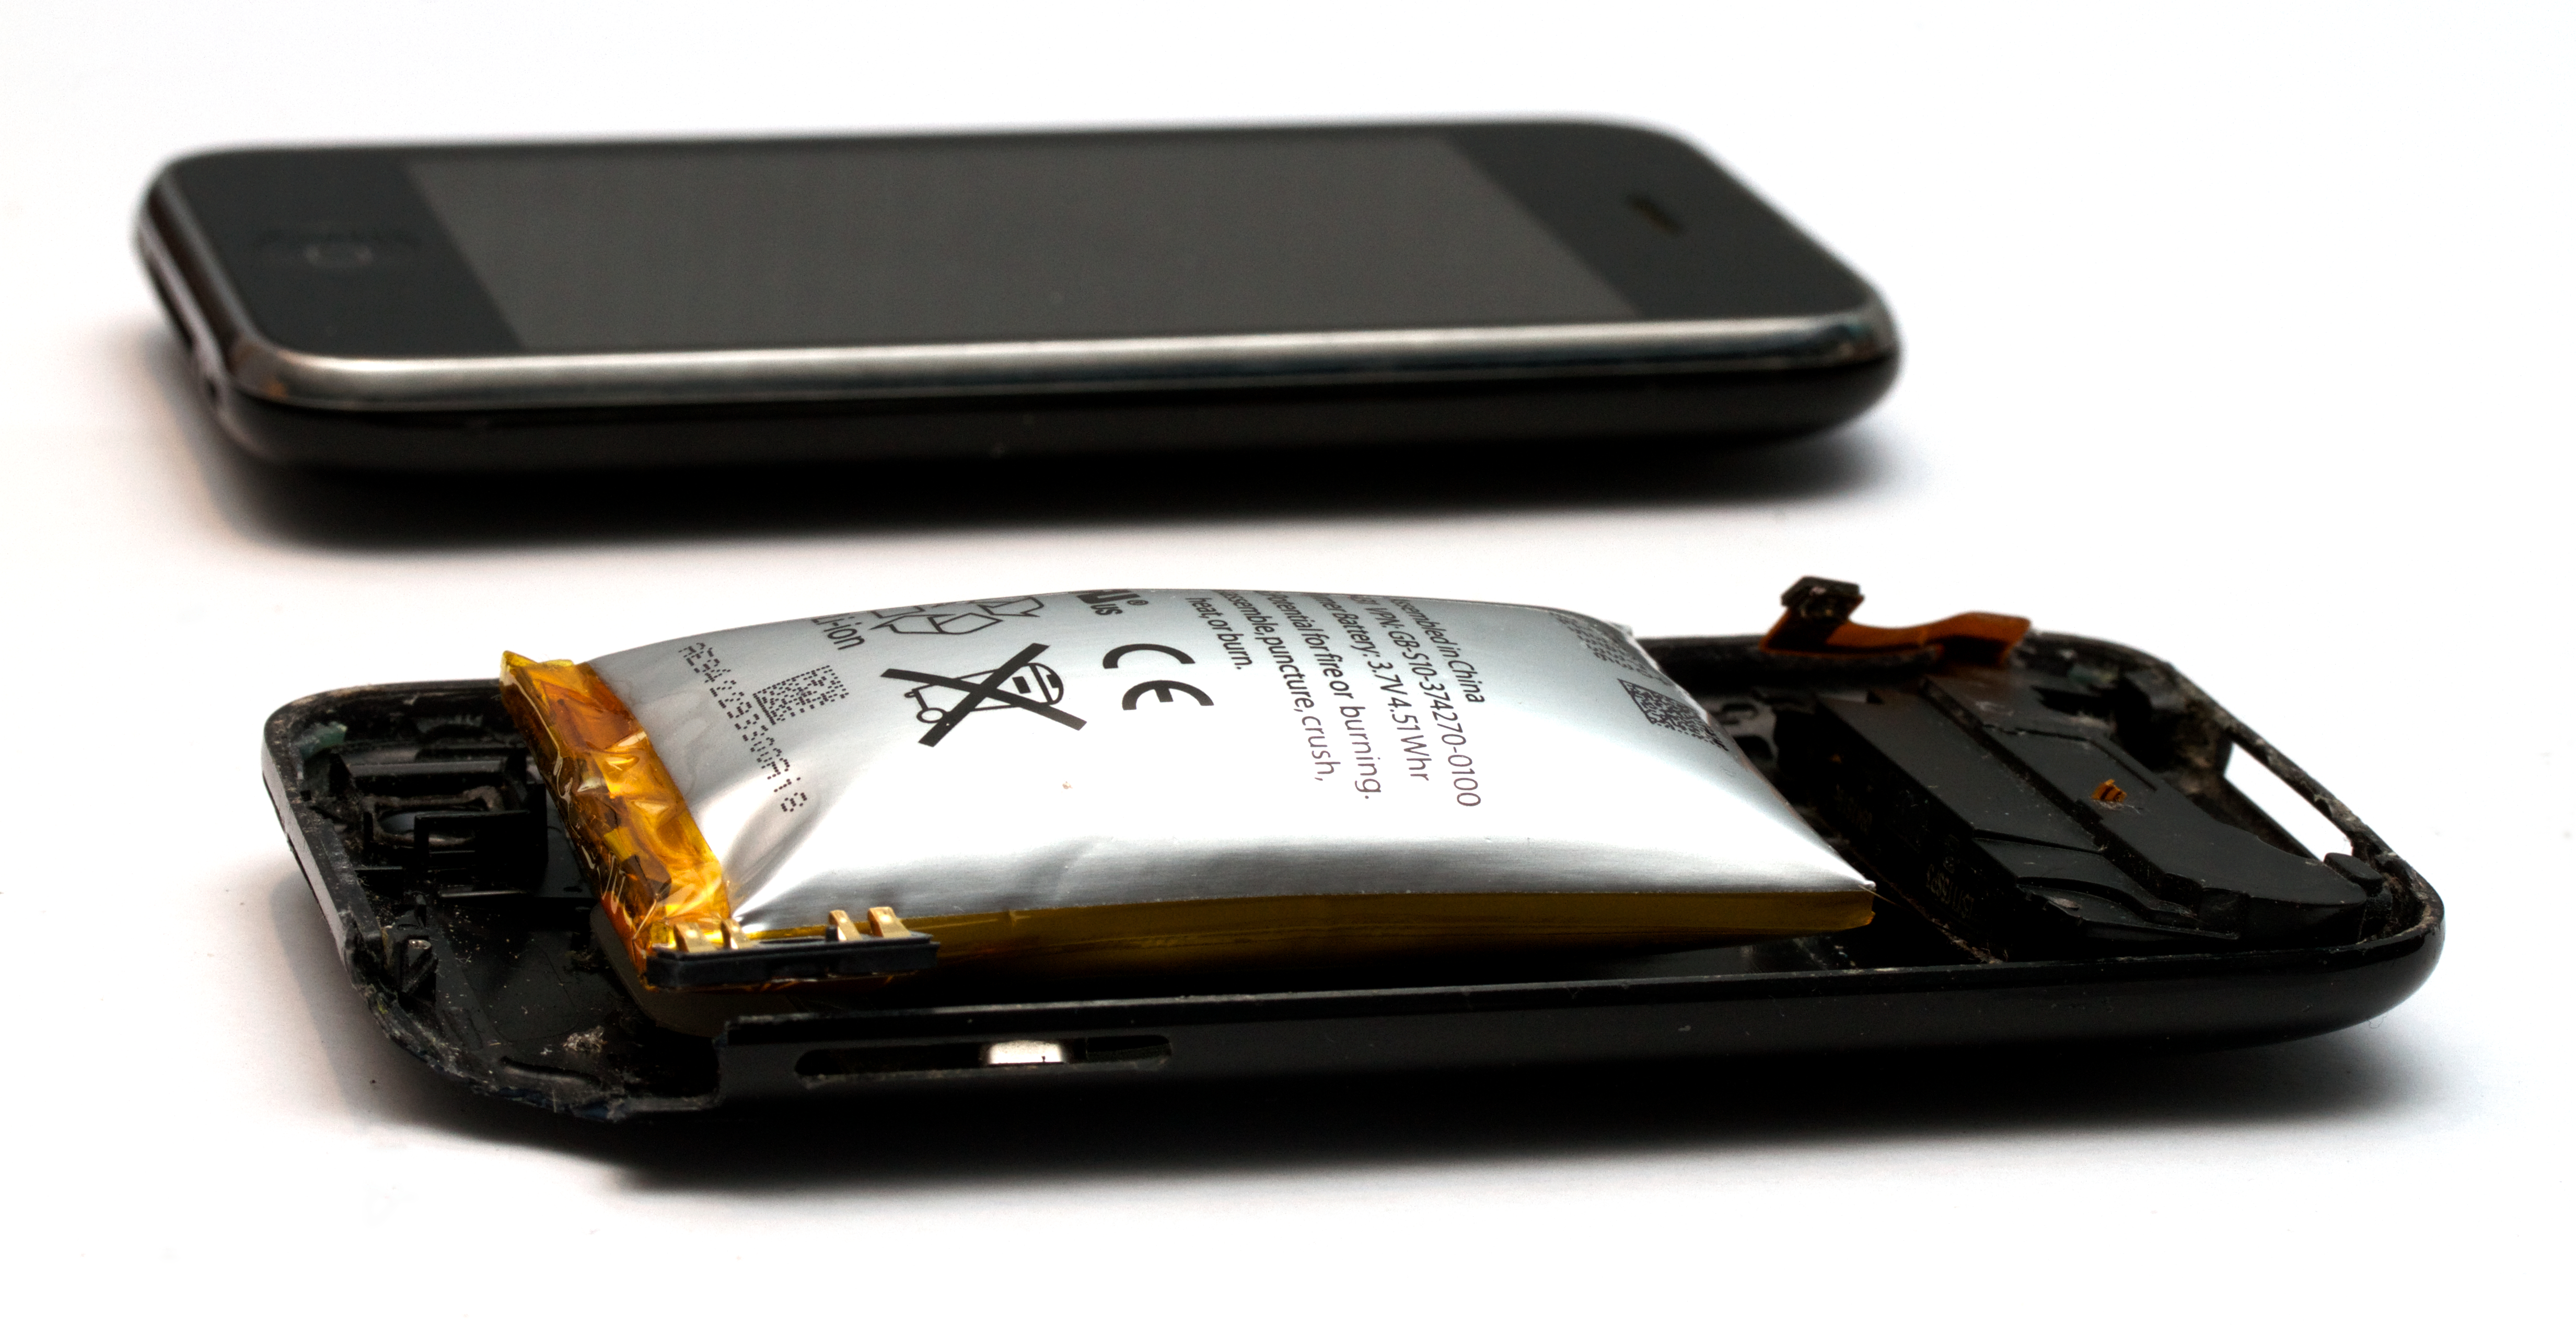 Expanded lithium-ion battery from a cell phone.